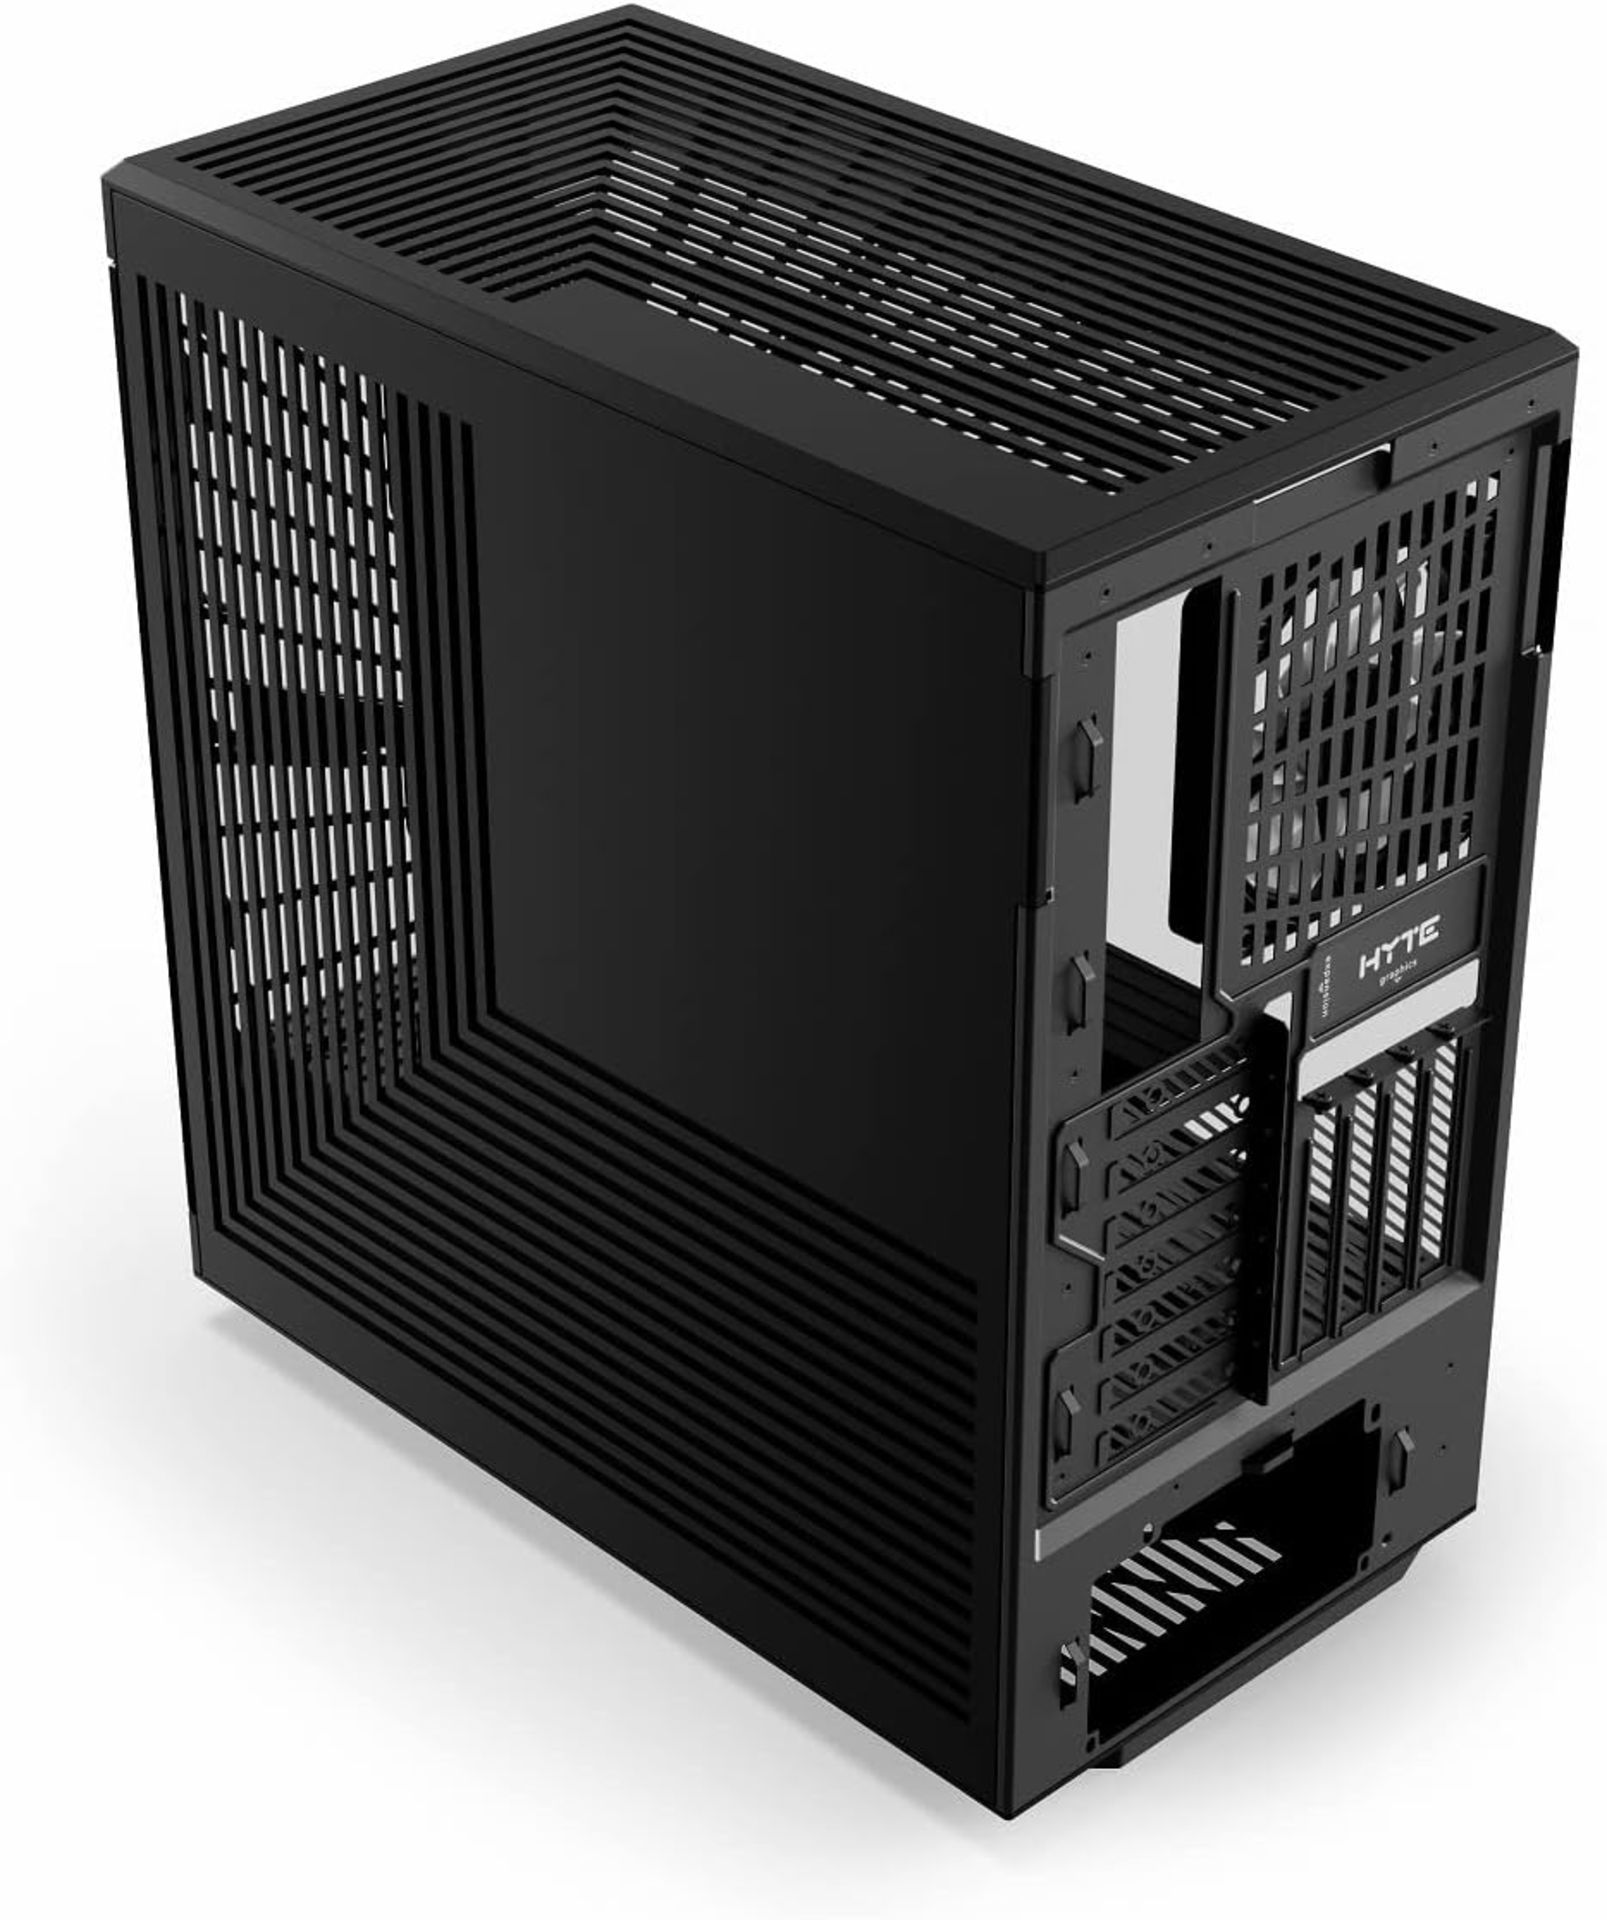 NEW & BOXED HYTE Y40 Mid-Tower ATX Case - Black. RRP £159.98. (R15R). The HYTE Y40 Mid-Tower ATX - Bild 3 aus 5